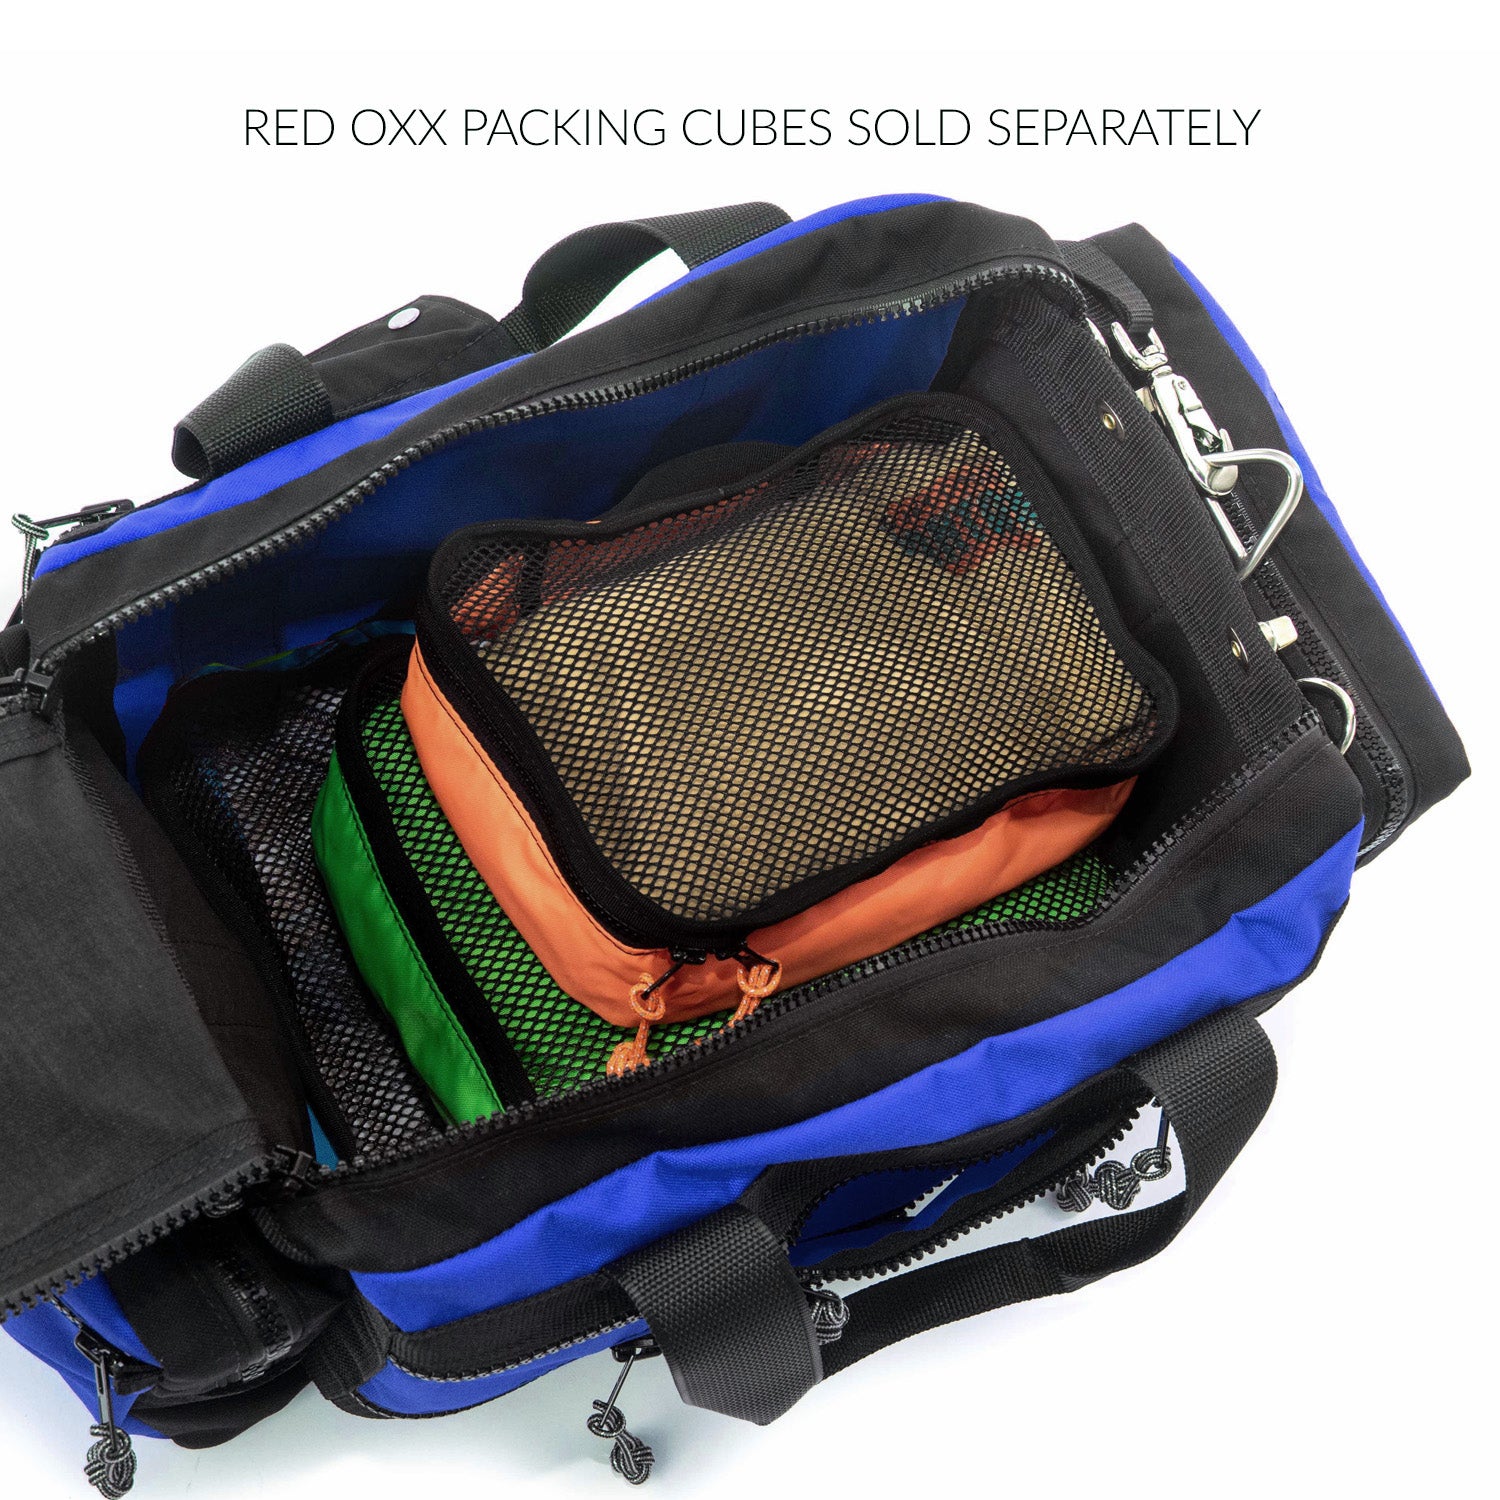 Red Oxx packing cubes sold separately. 